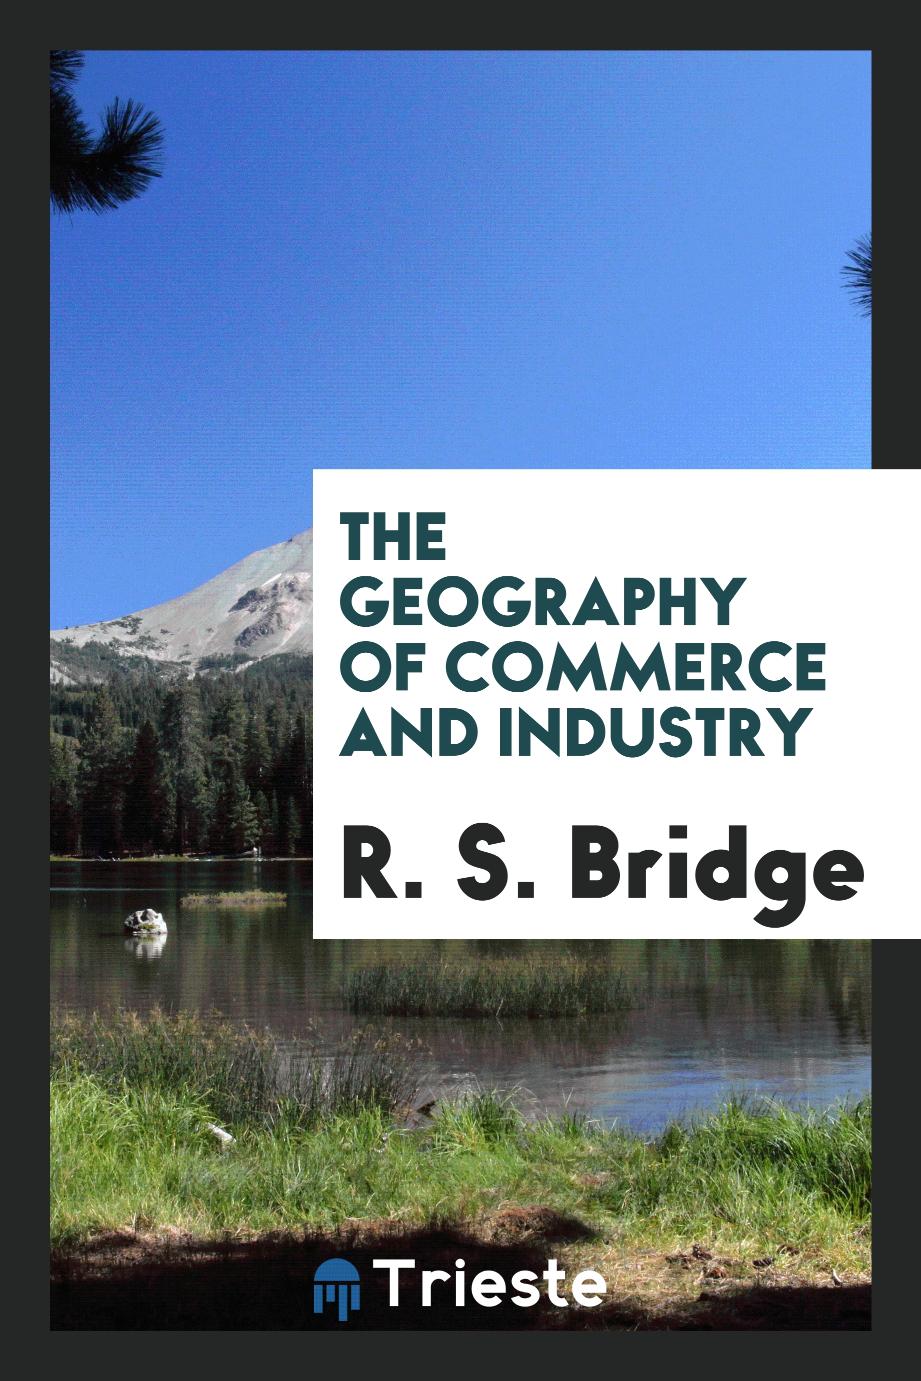 The geography of commerce and industry